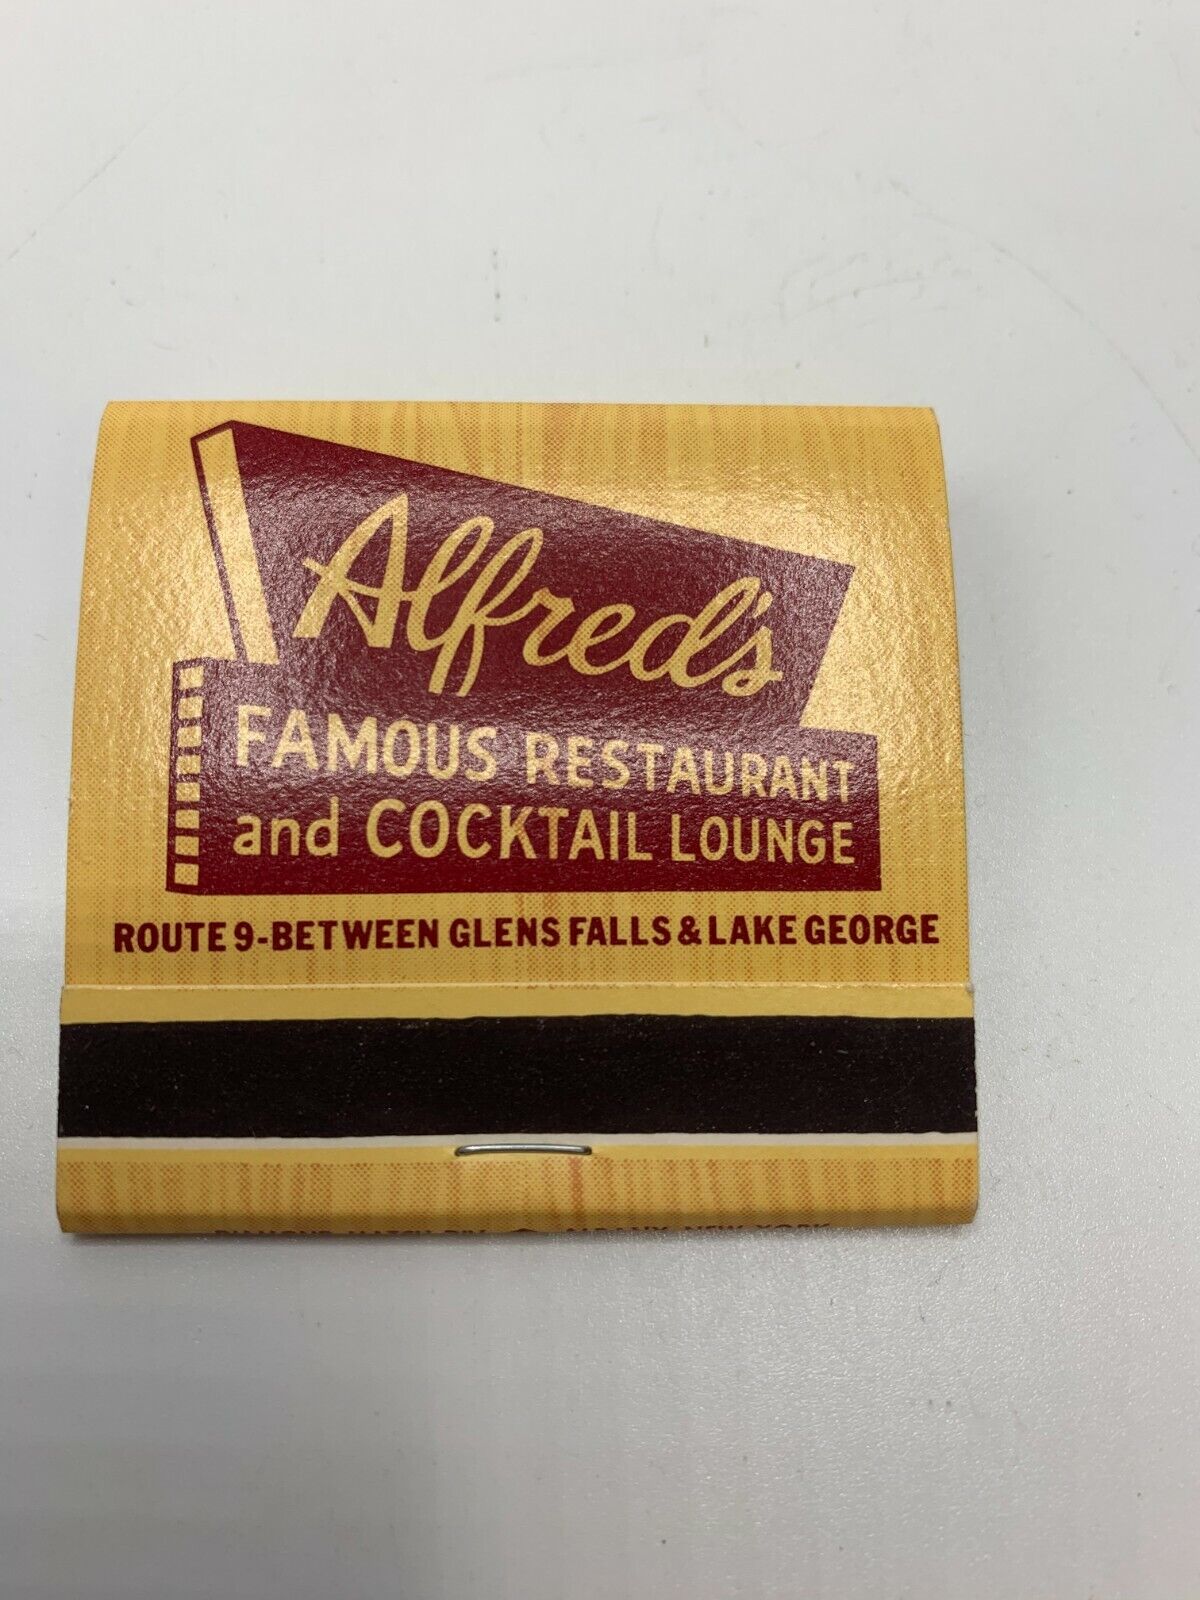 VTG Alfred\'s Restaraunt and Cocktail Lounge Lake George NY Matches Matchbook